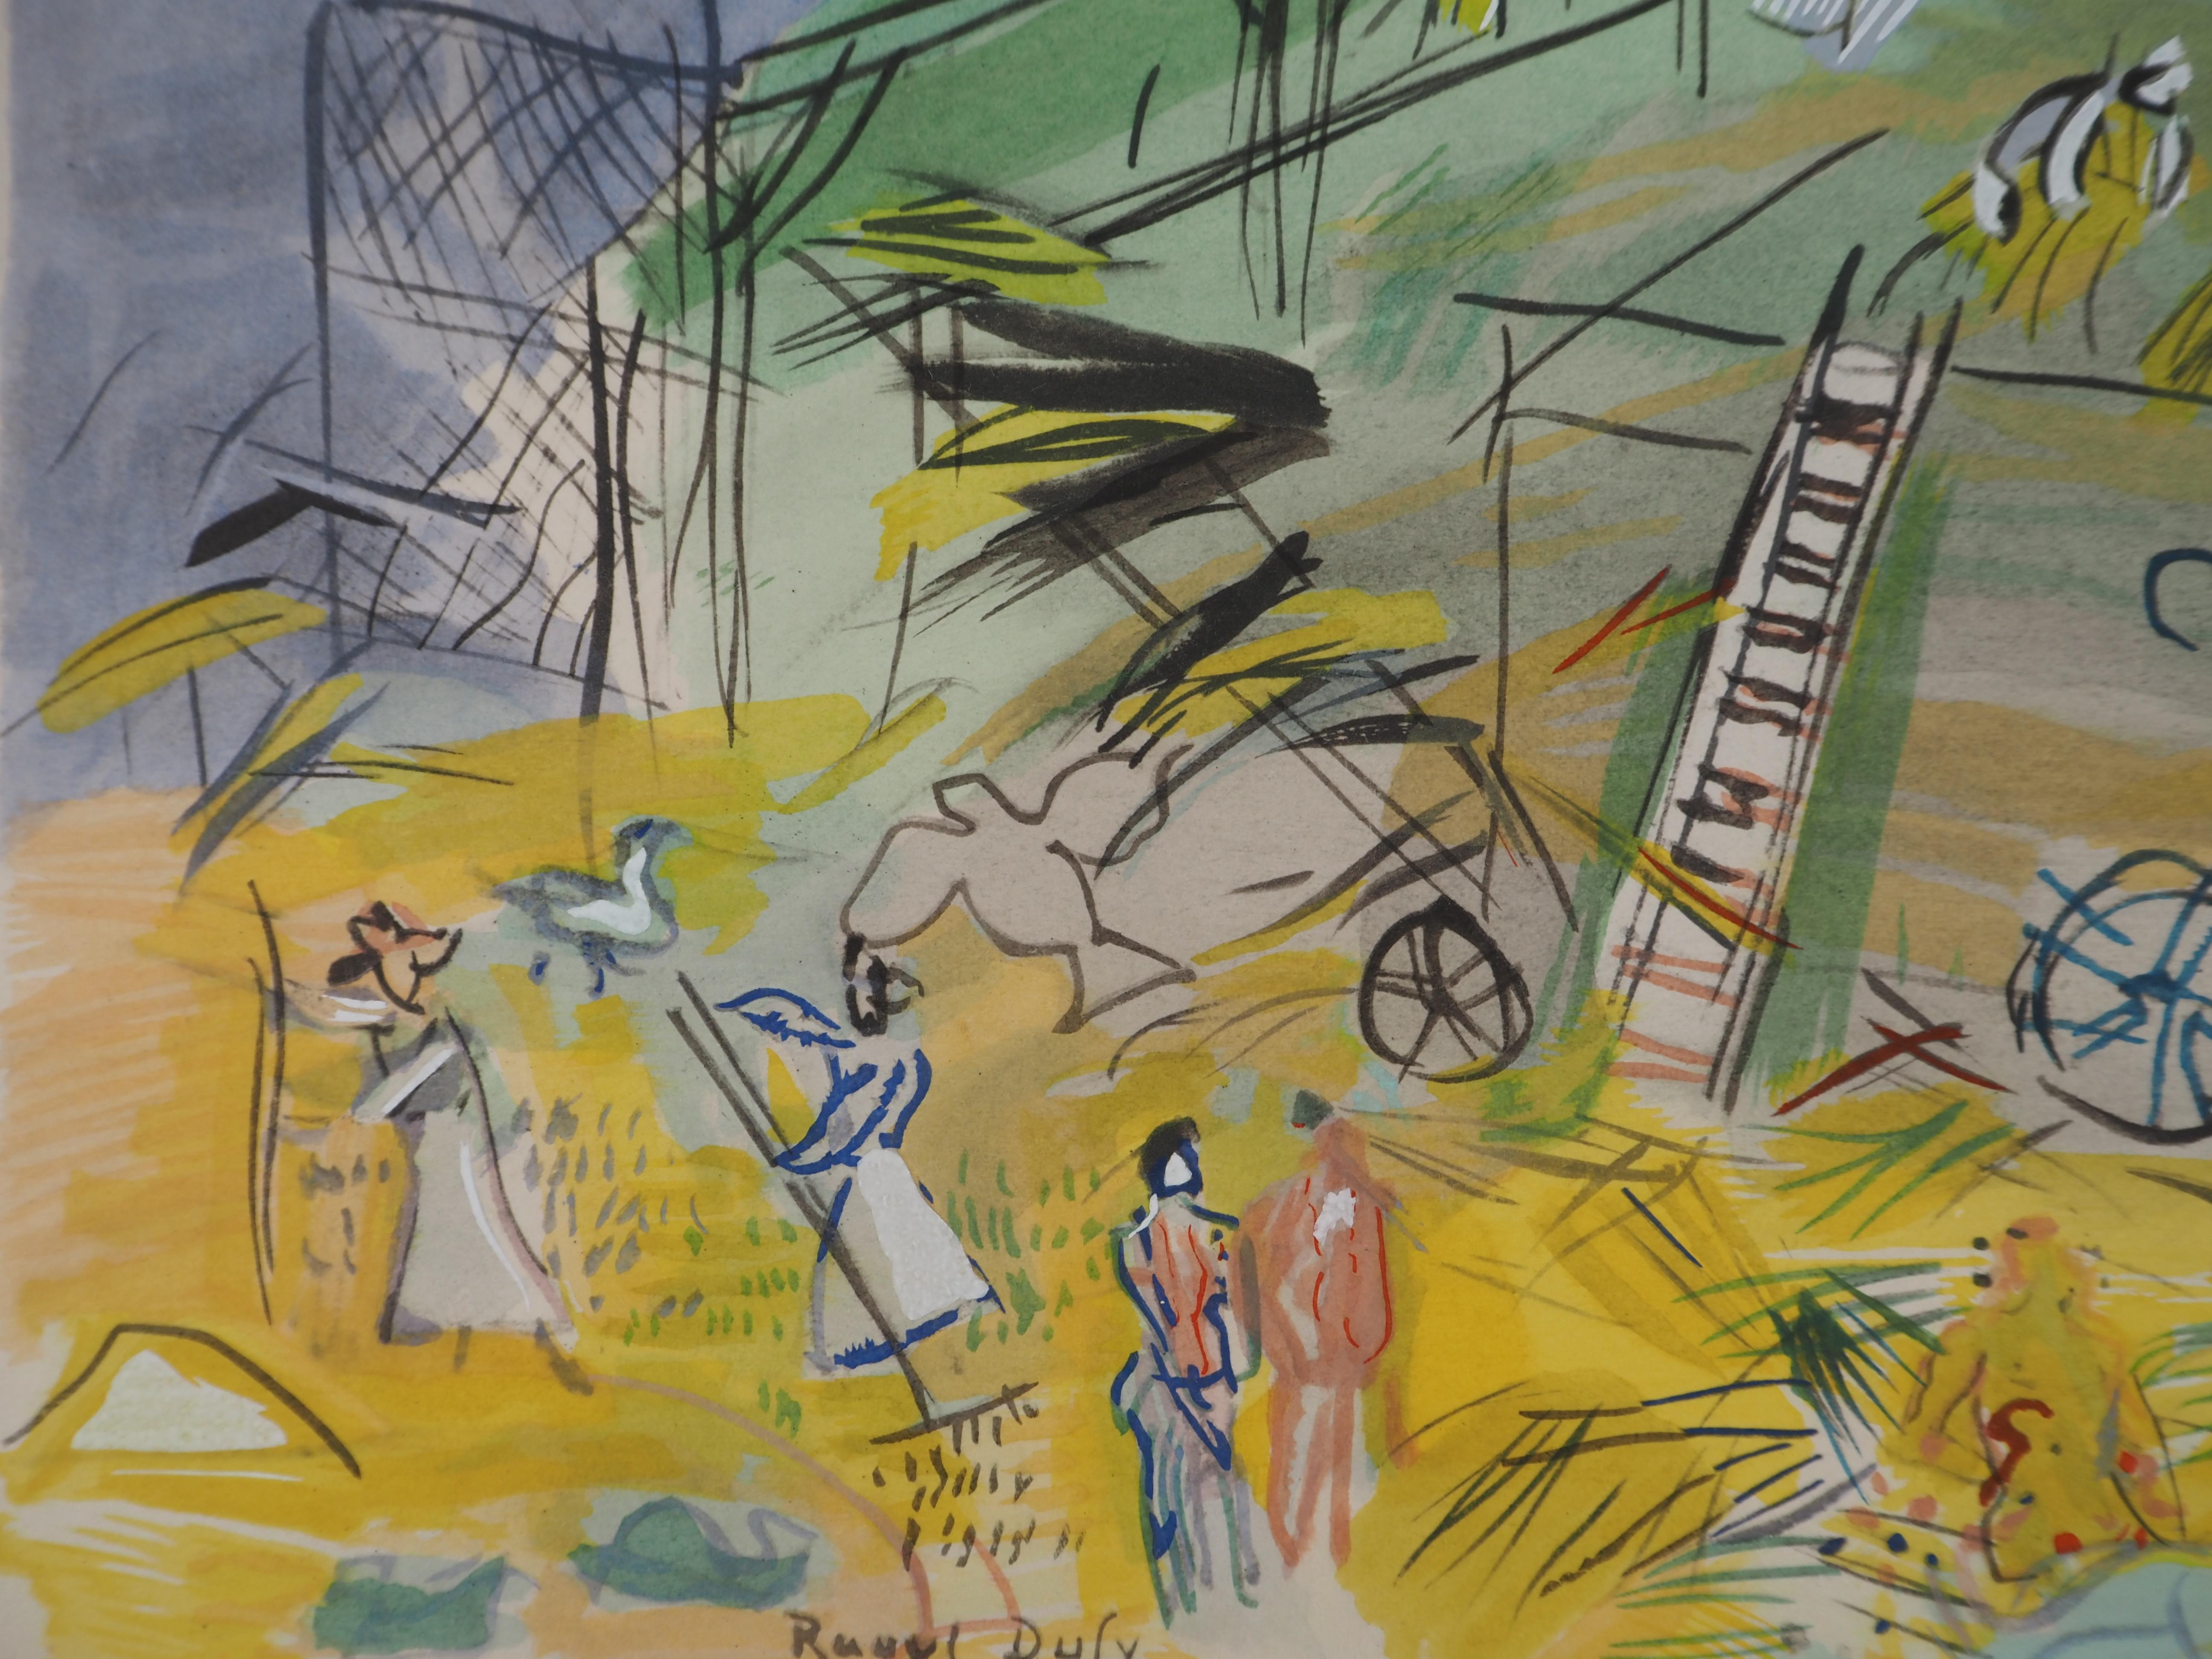 Raoul DUFY
Summer : Harvest Time, 1953

Original Lithograph with stencil watercolor
With printed signature in the plate
On Arches vellum
28 x 38 cm (c. 11 x 15 inch)

Very good condition 